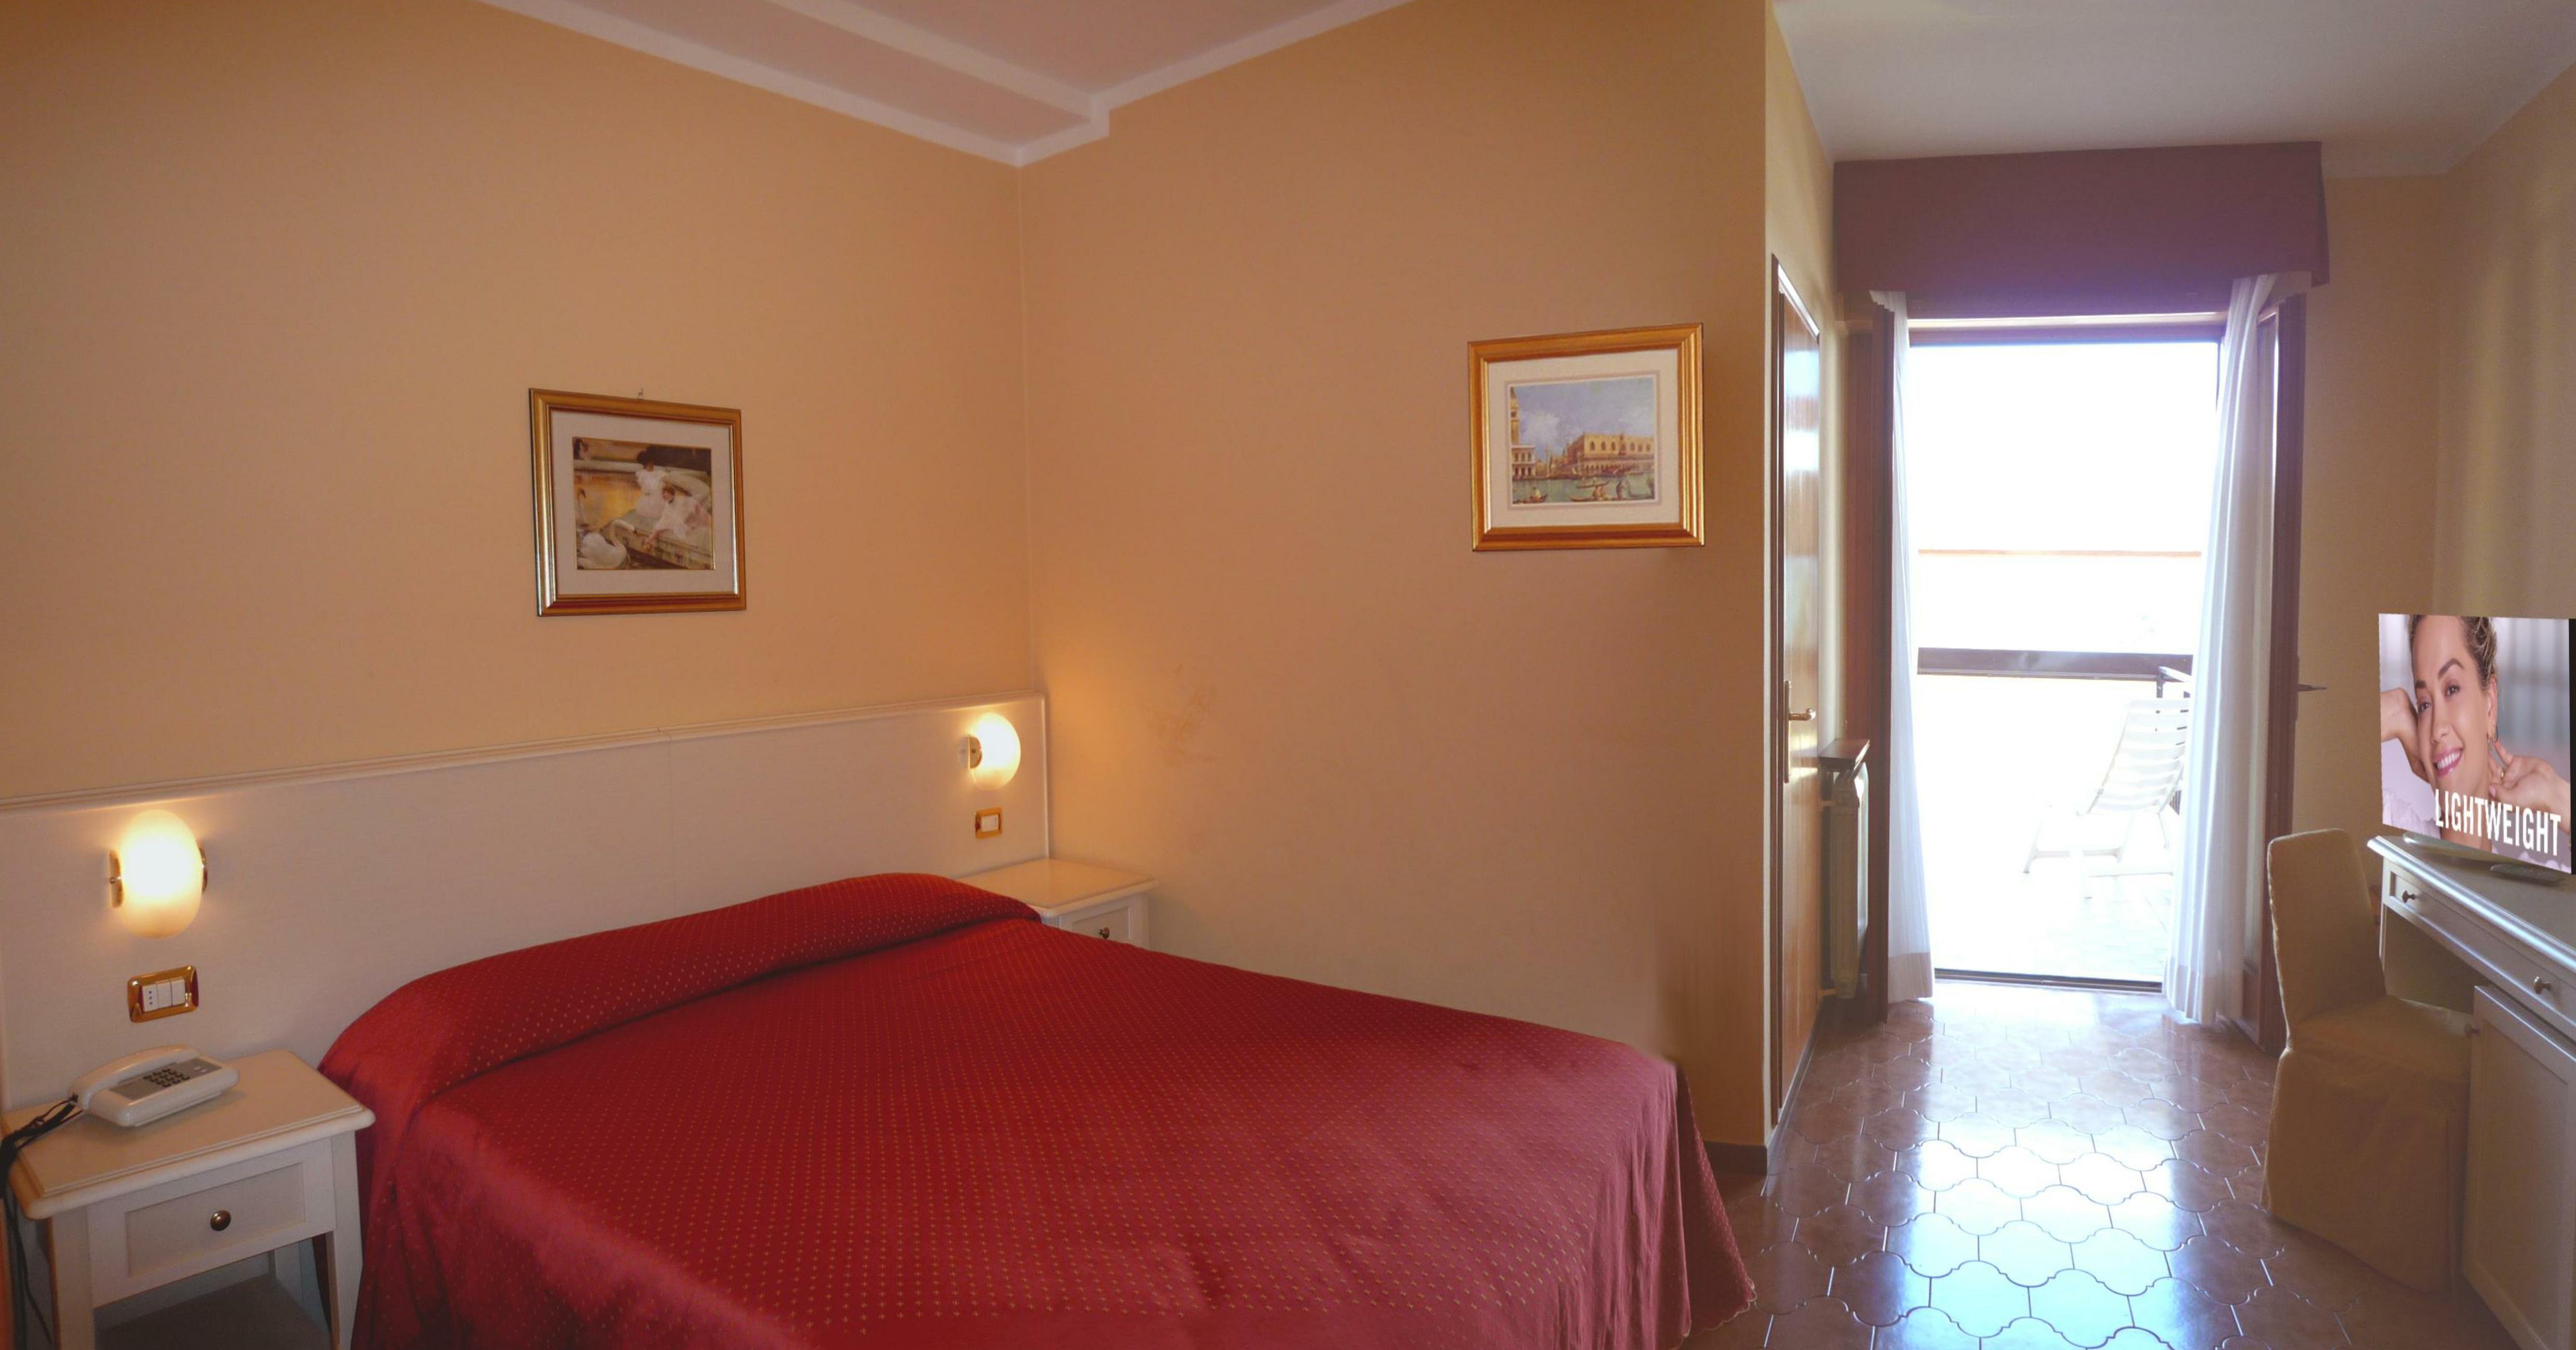 Manerba Double Room in Manerba A holiday near the Gulf of Garda where you can save money without sacrificing luxury